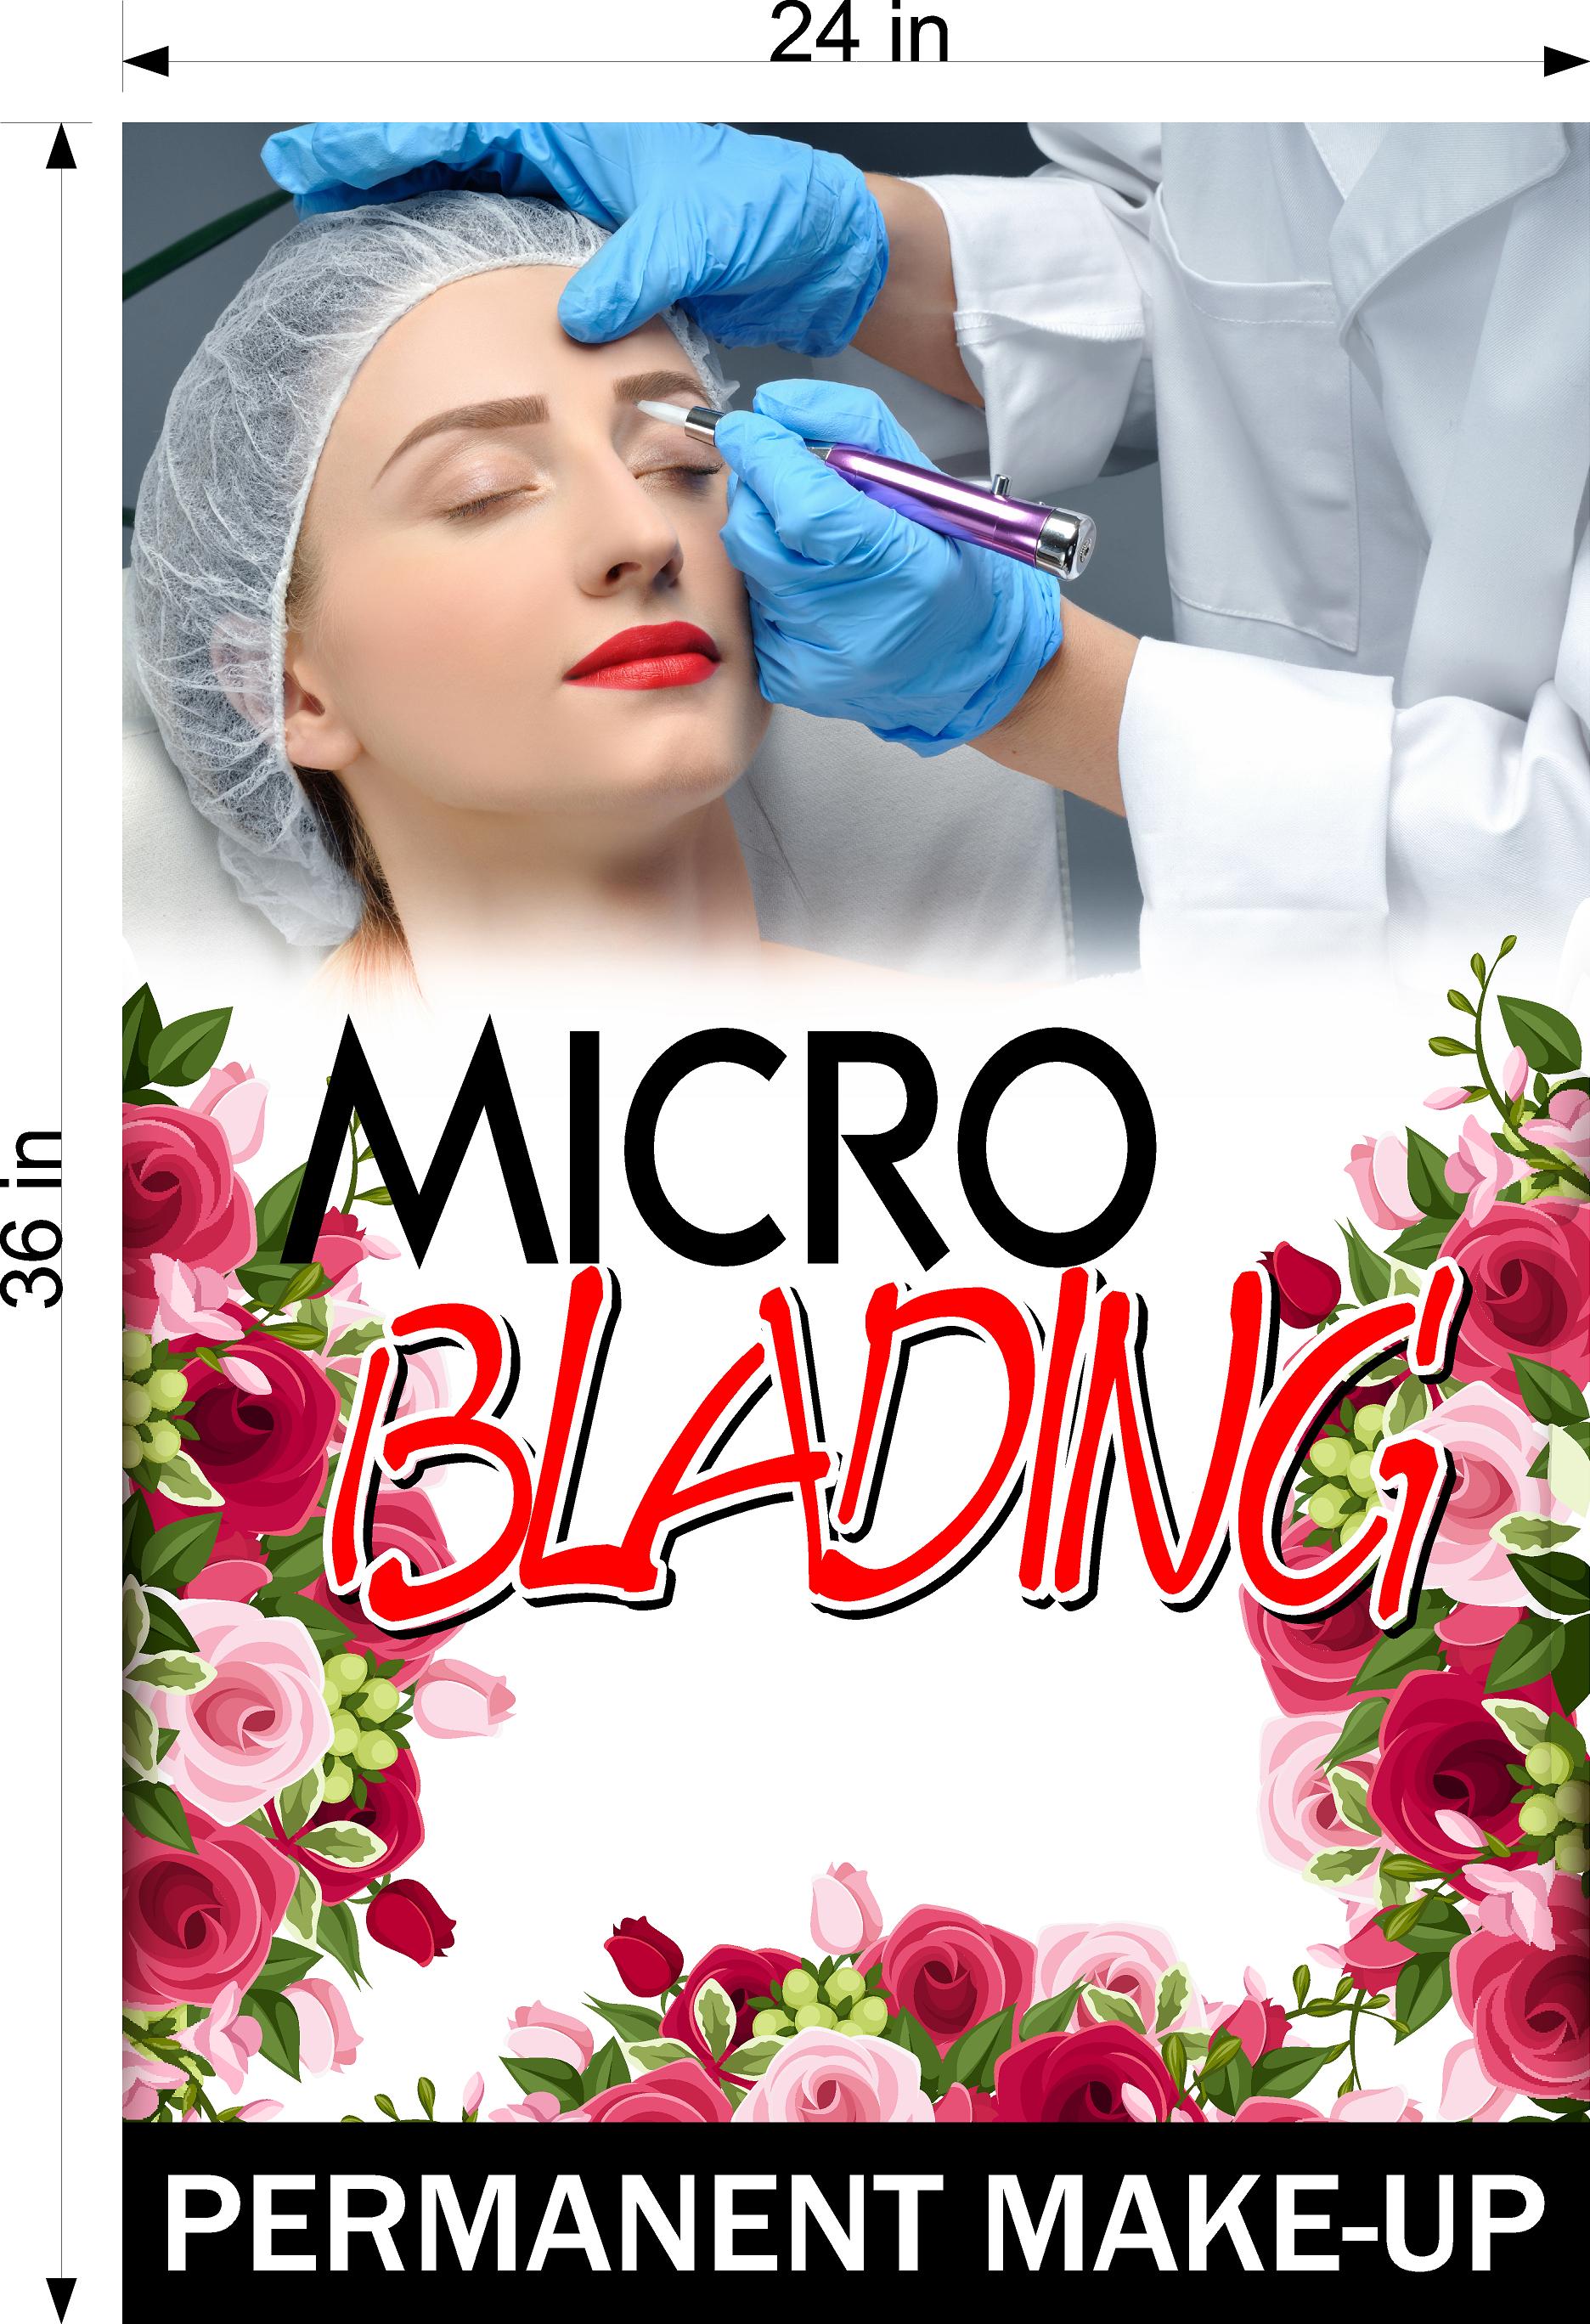 Microblading 12 Perforated Mesh One Way Vision See-Through Window Vinyl Salon Services Permanent Makeup Tattoo Vertical